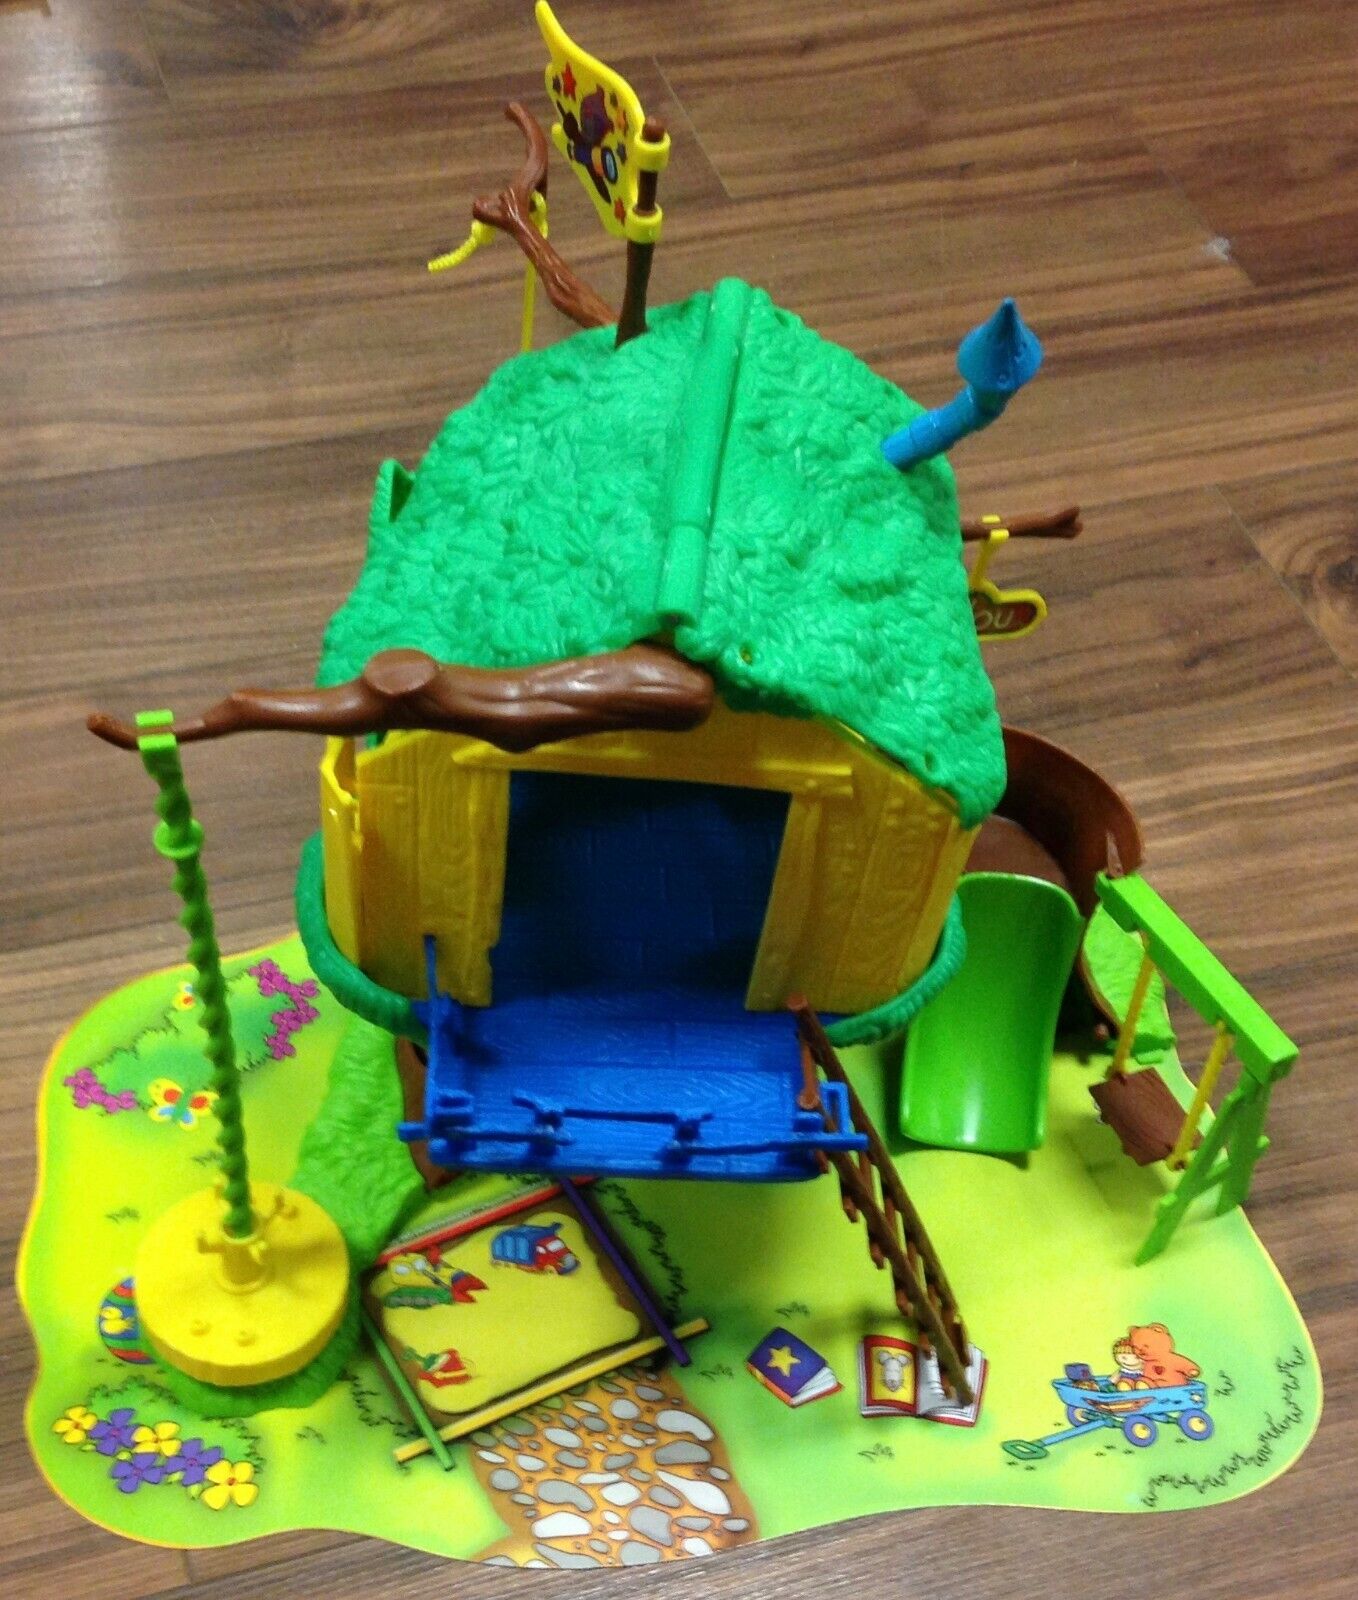 Euc Pbs Kids Caillou Tree House Playset With Figures Treehouse